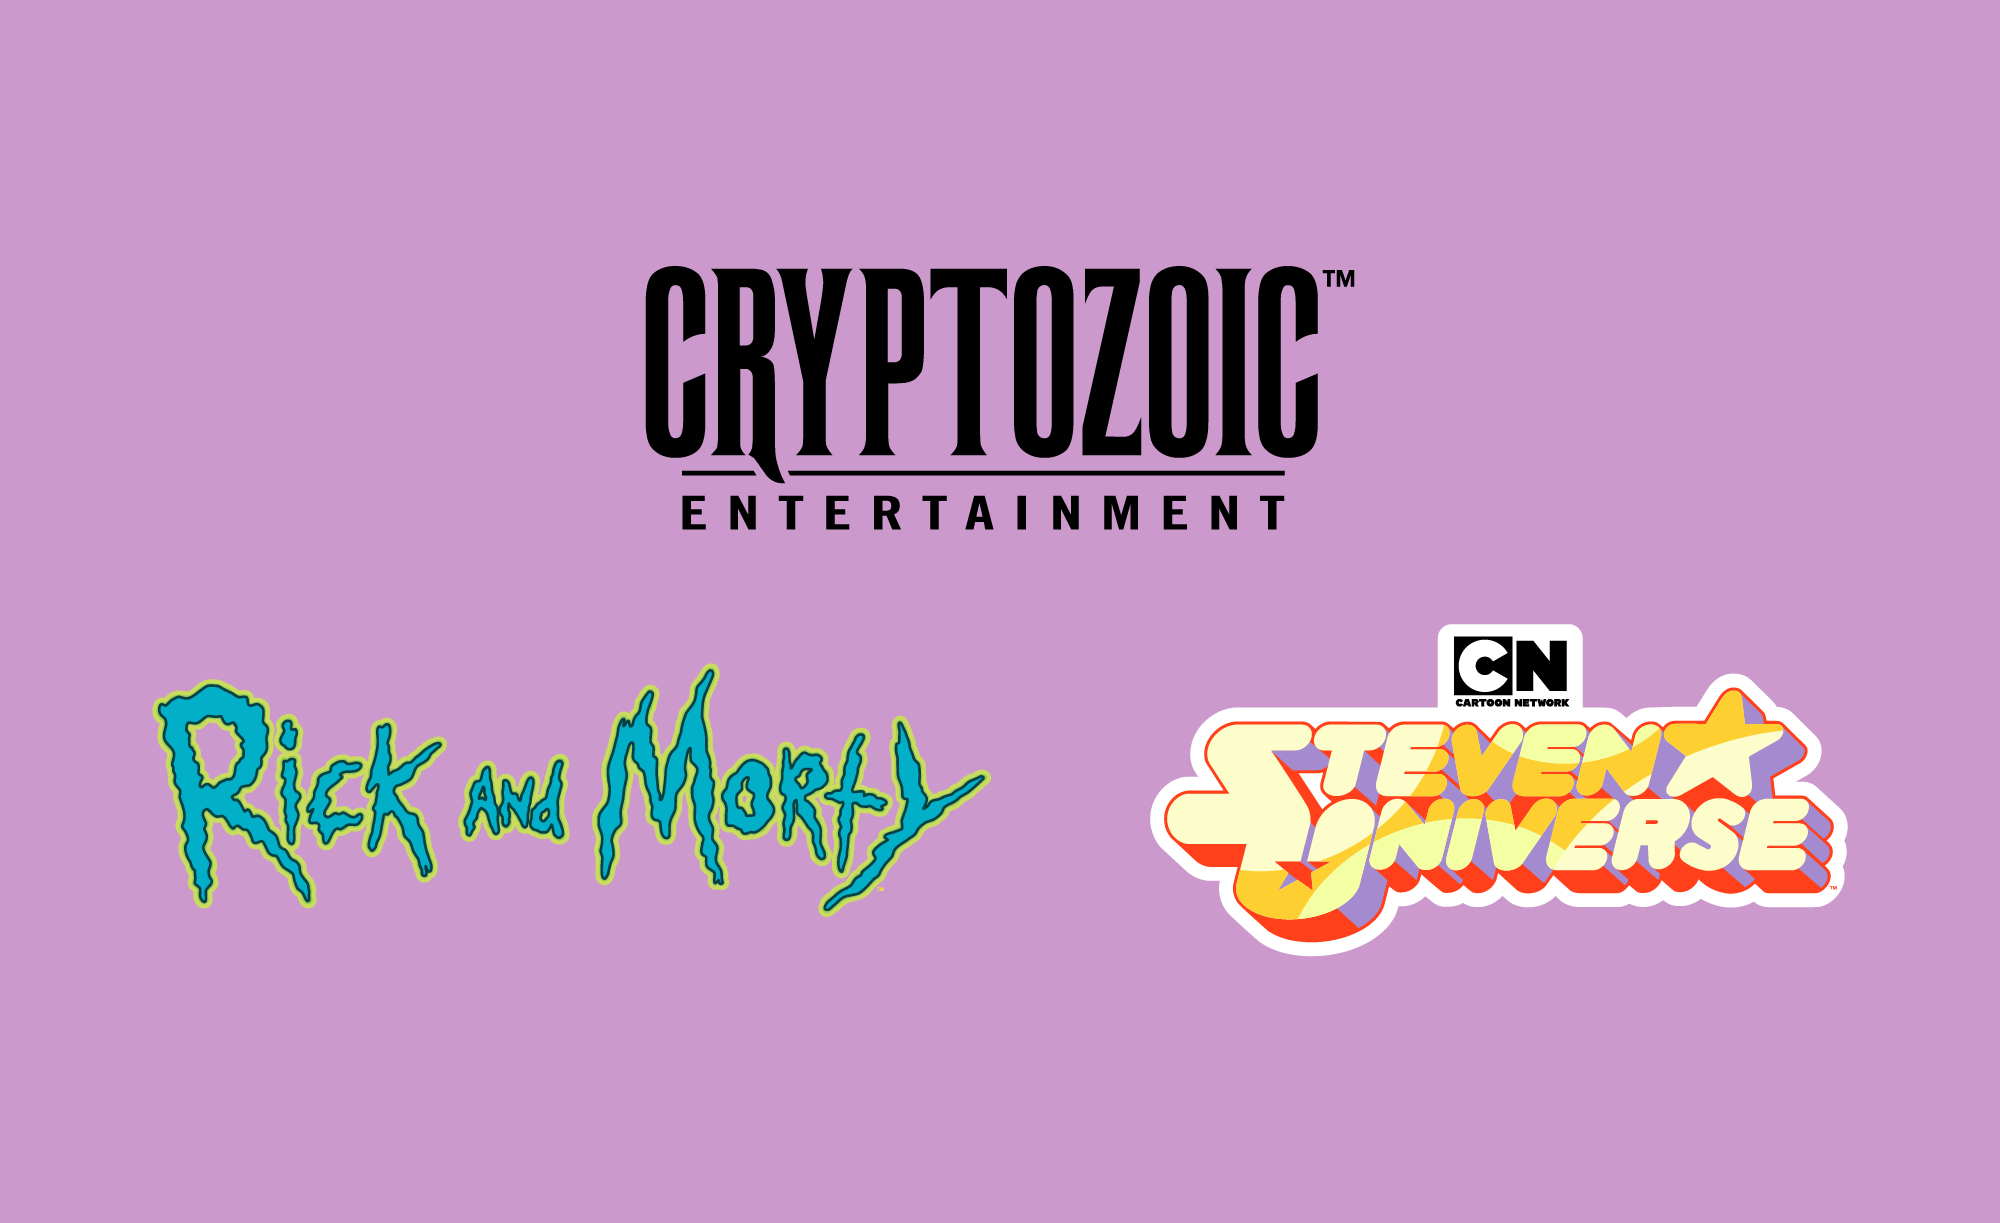 Preview of my entertainment work by displaying logos of properties/licenses I have worked on.